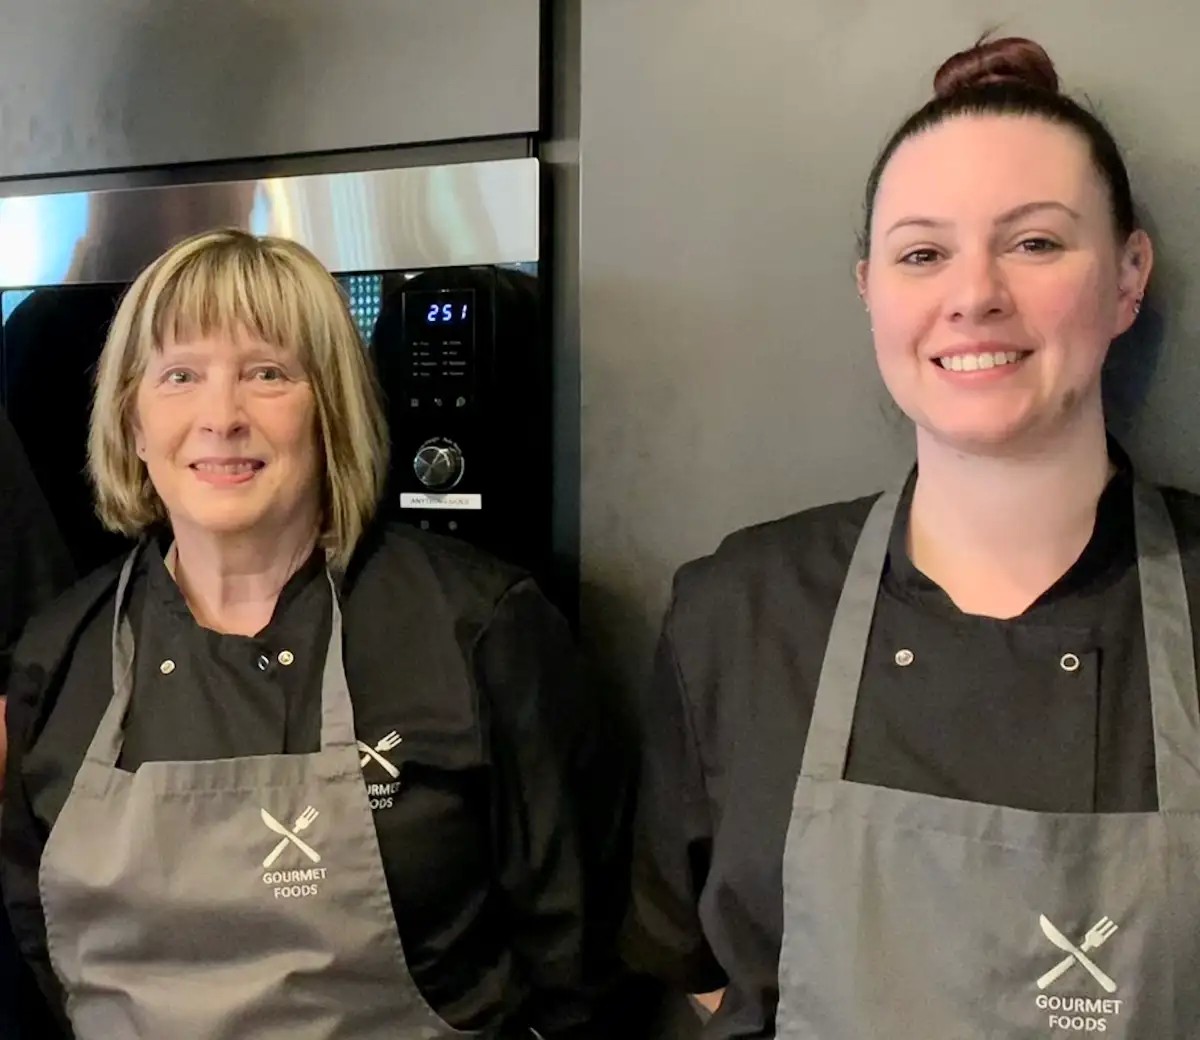 Fenella and Laura, the main staff of Gourmet Foods